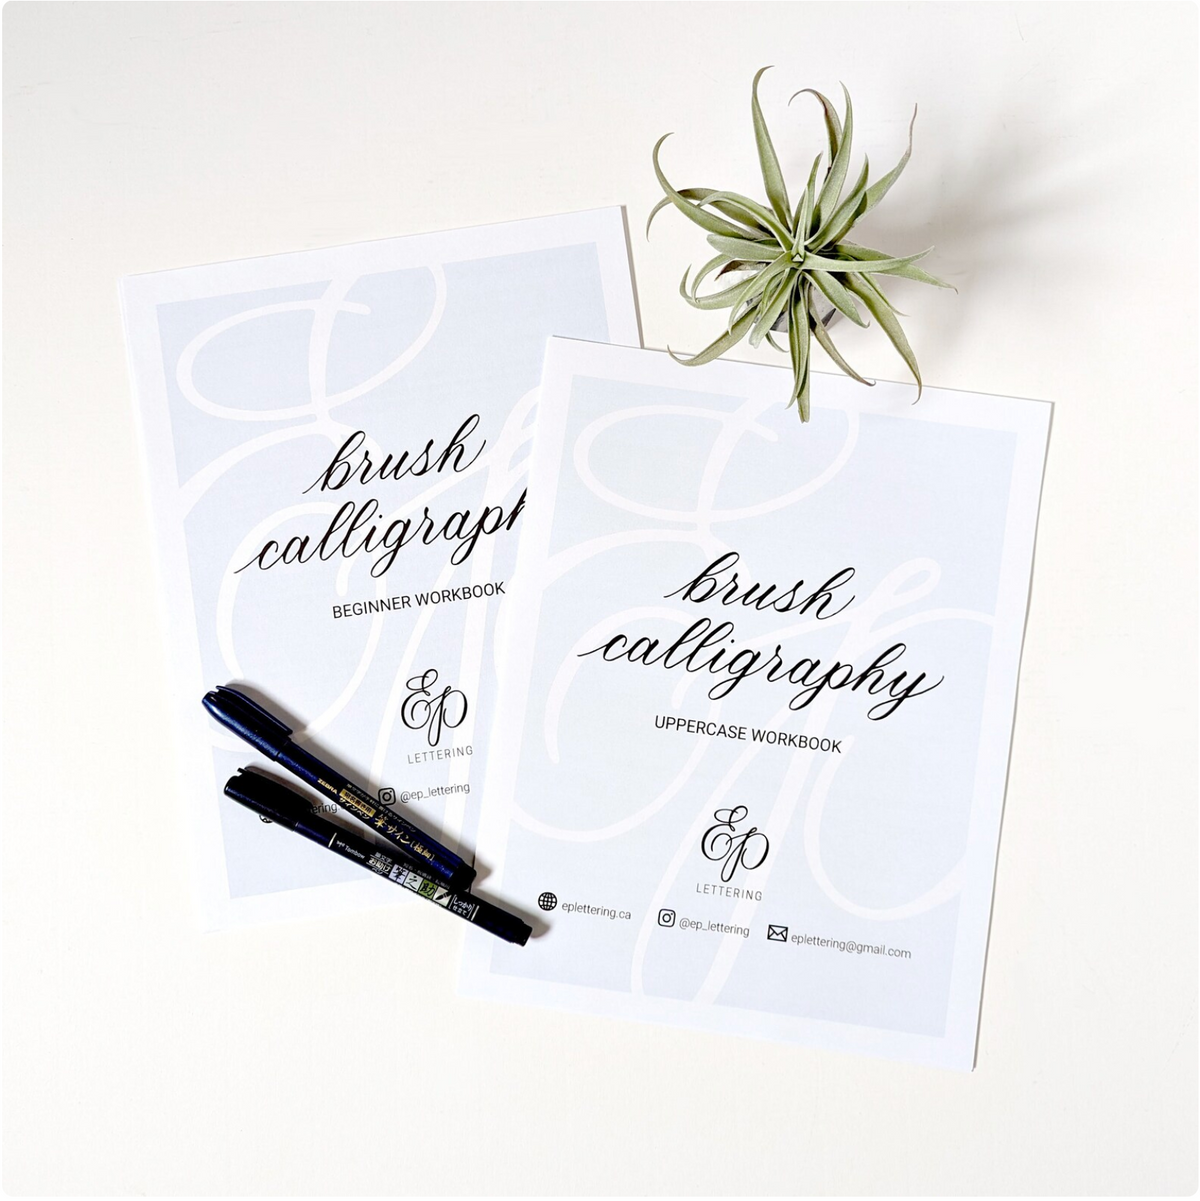 Erica Pinto Hand Lettering - Brush Calligraphy Bundle (2 PDFs) - Includes &#39;Brush Calligraphy - Beginner Workbook&#39; + &#39;Brush Calligraphy - Uppercase Workbook&#39;